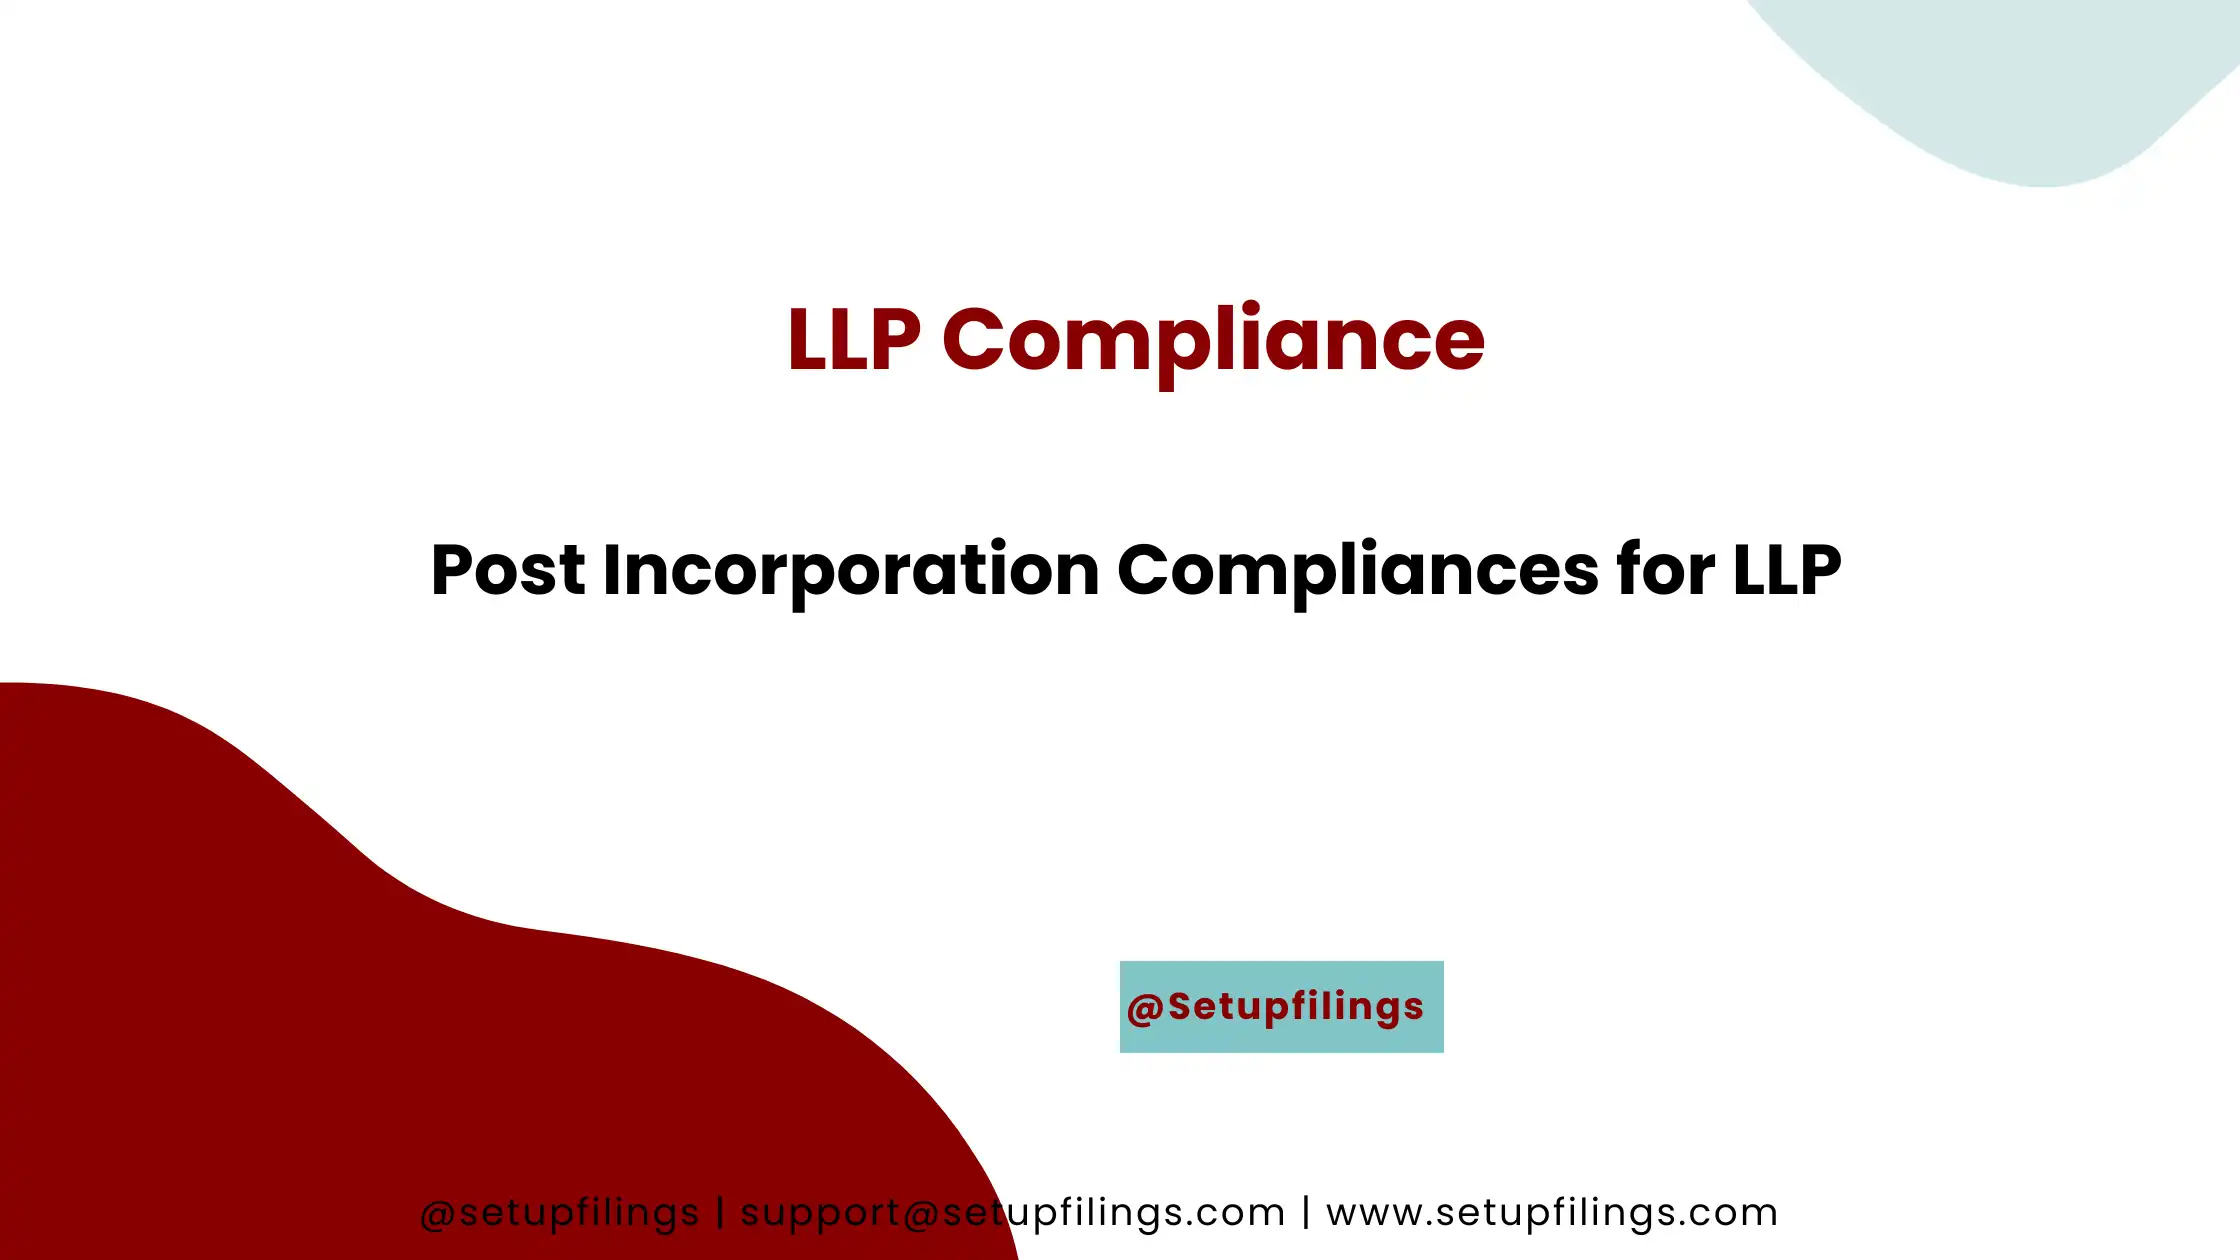 Post Incorporation Compliances for LLP